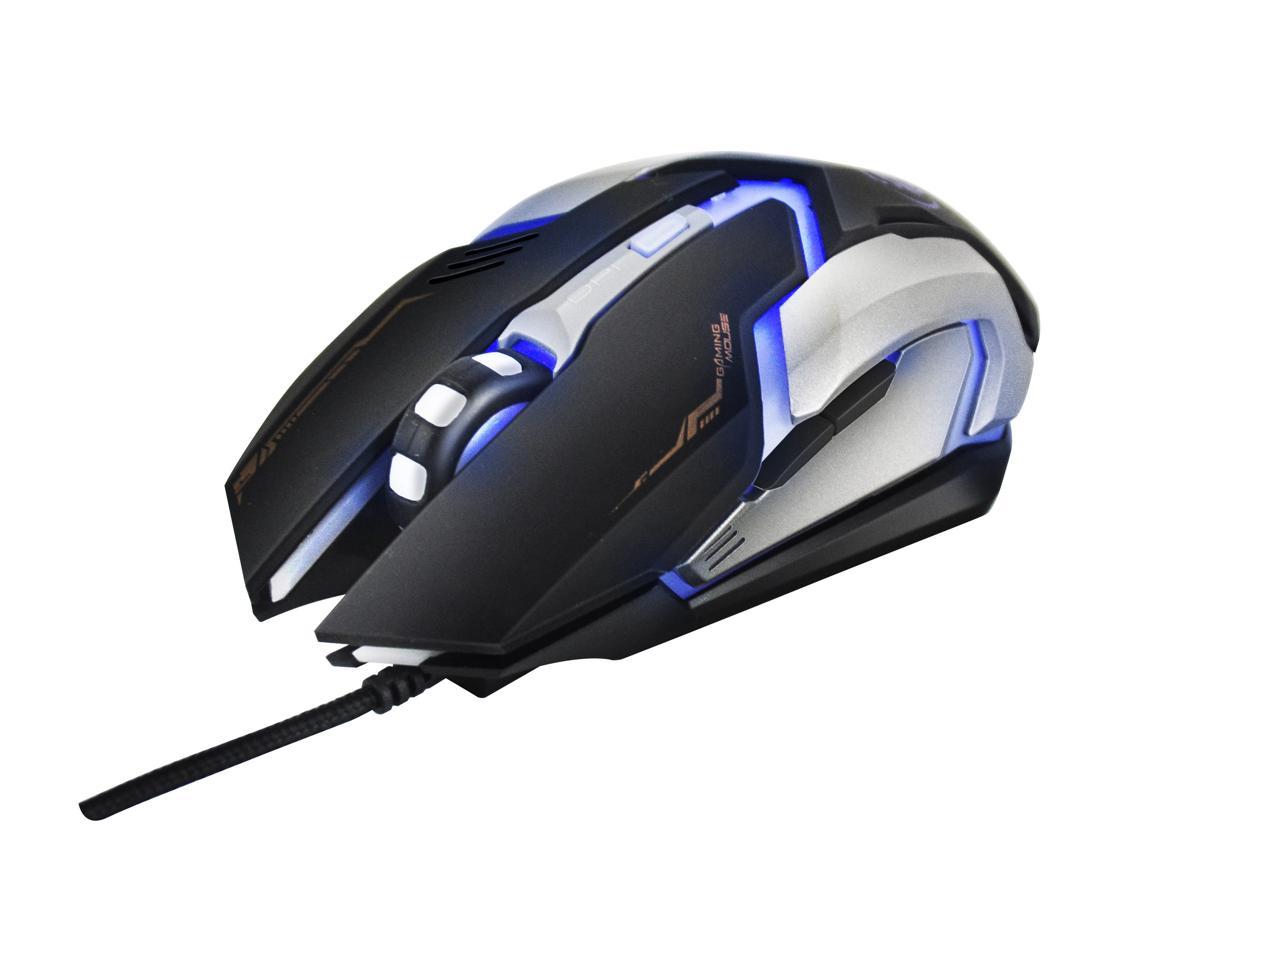 IMICE V6 Professional Wired Gaming Mouse 3200DPI 6 Buttons Optical USB ...